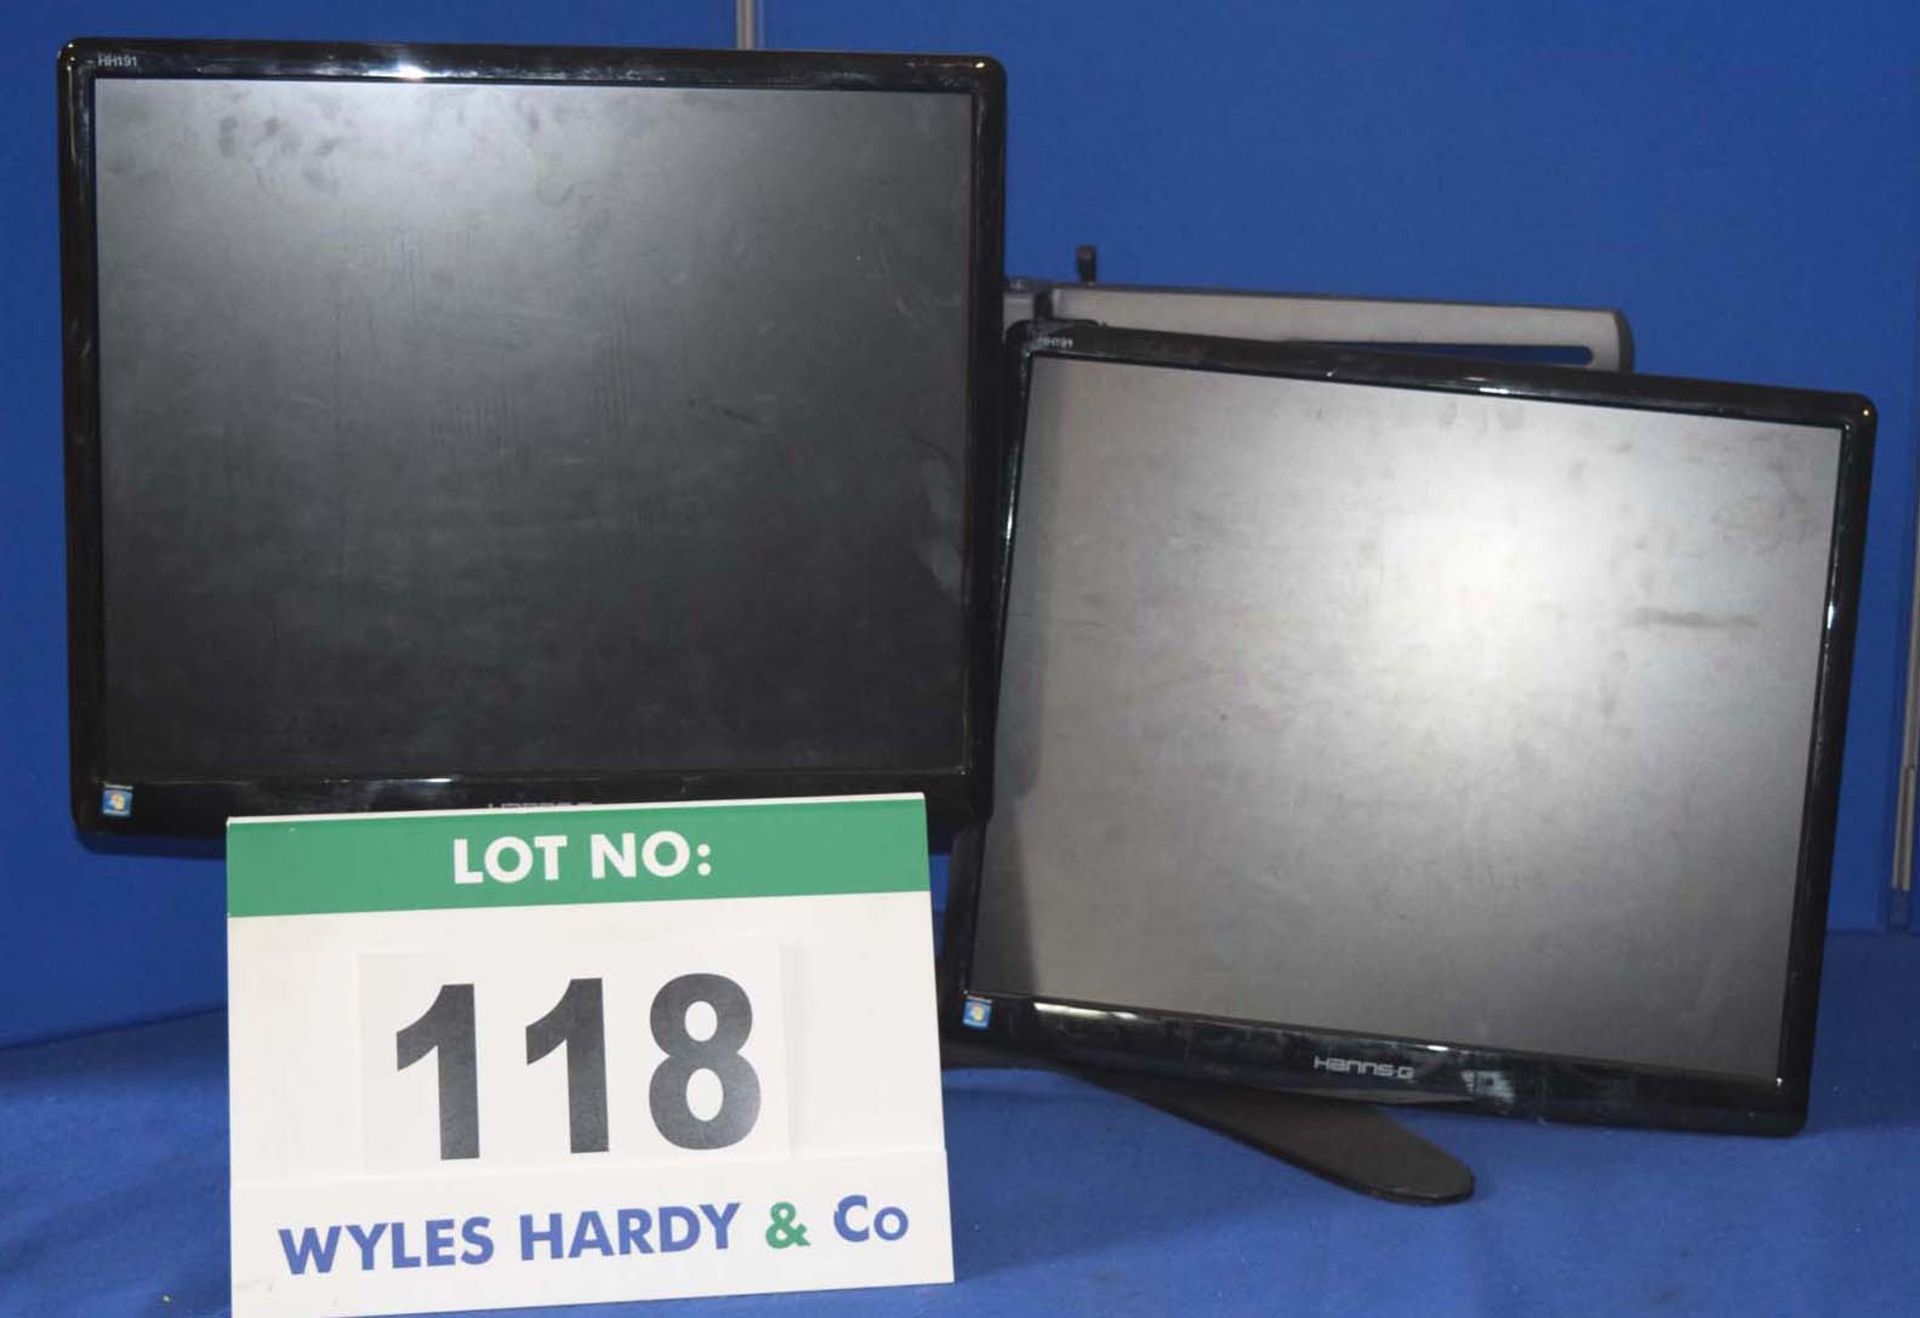 2: HANNS G 19" Flat Panel Displays on an Adjustable Twin Monitor Stand (No Fixing Screws for Monitor